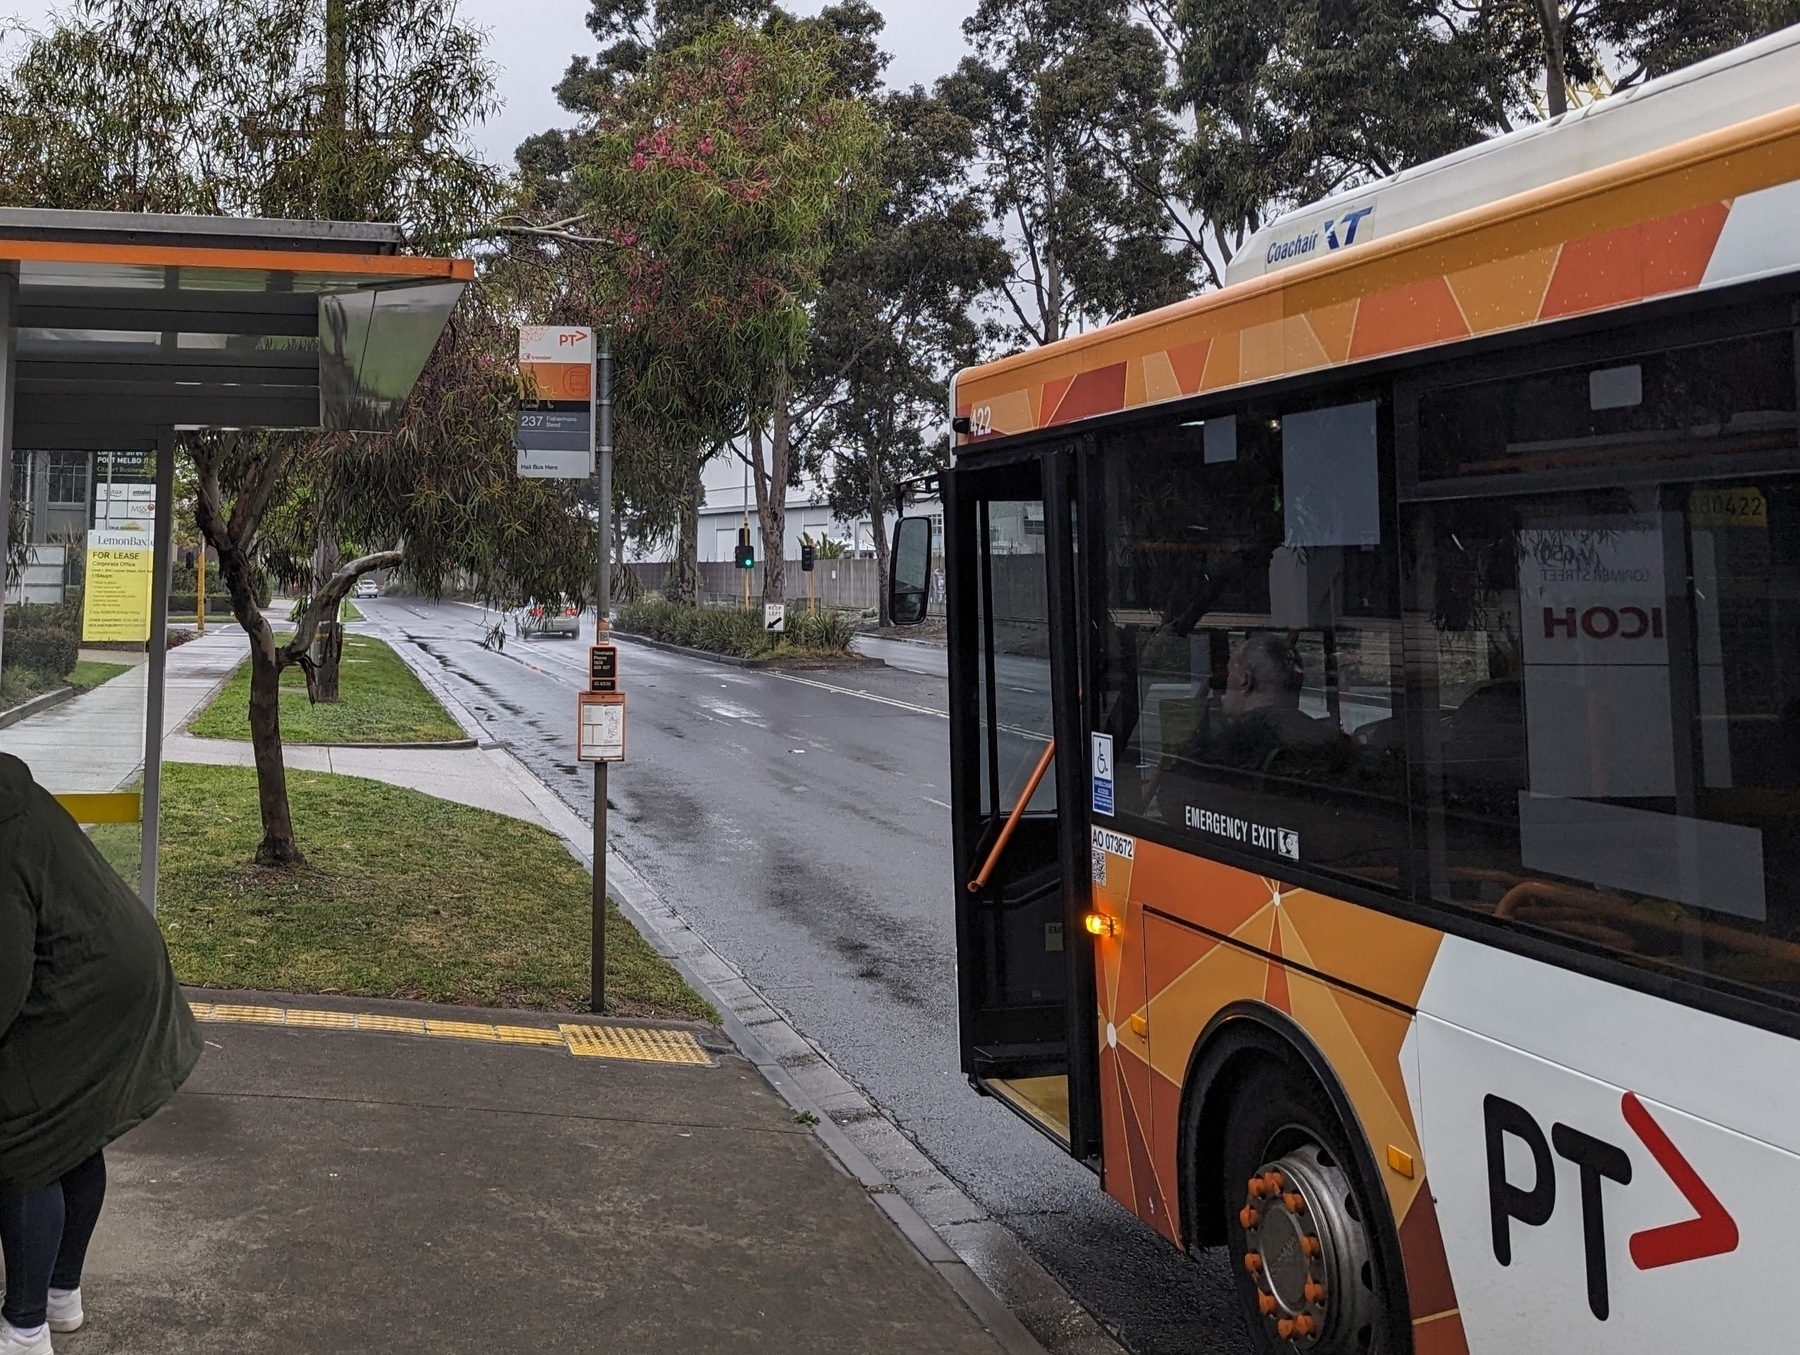 A bus in orange livery at a bus-stop with an orange sign and trim